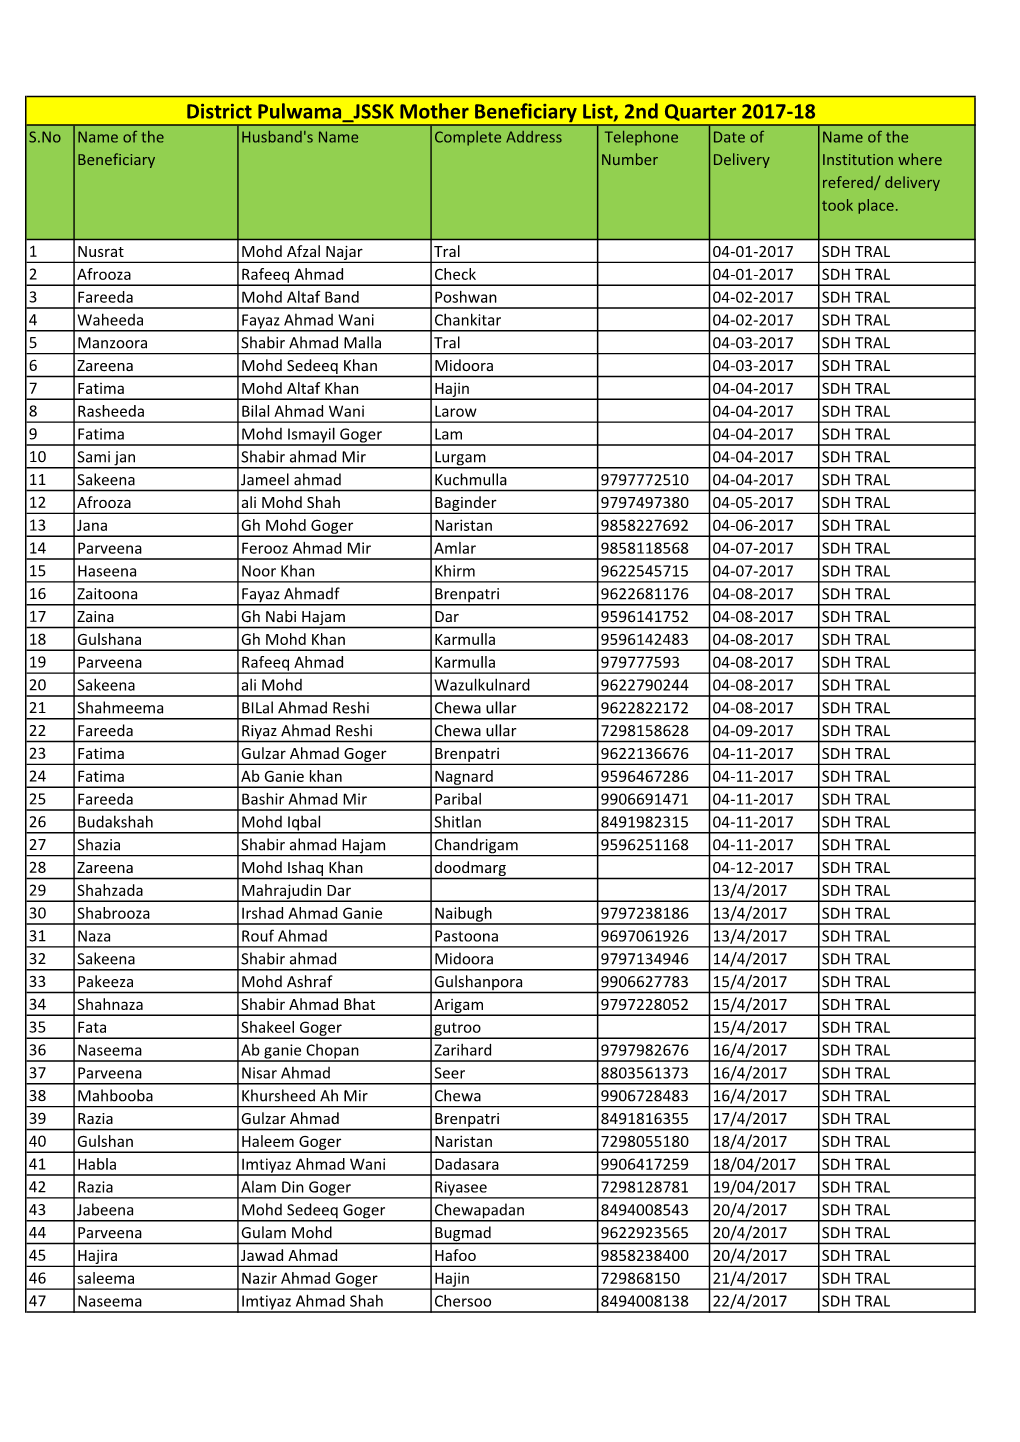 District Pulwama JSSK Mother Beneficiary List, 2Nd Quarter 2017-18